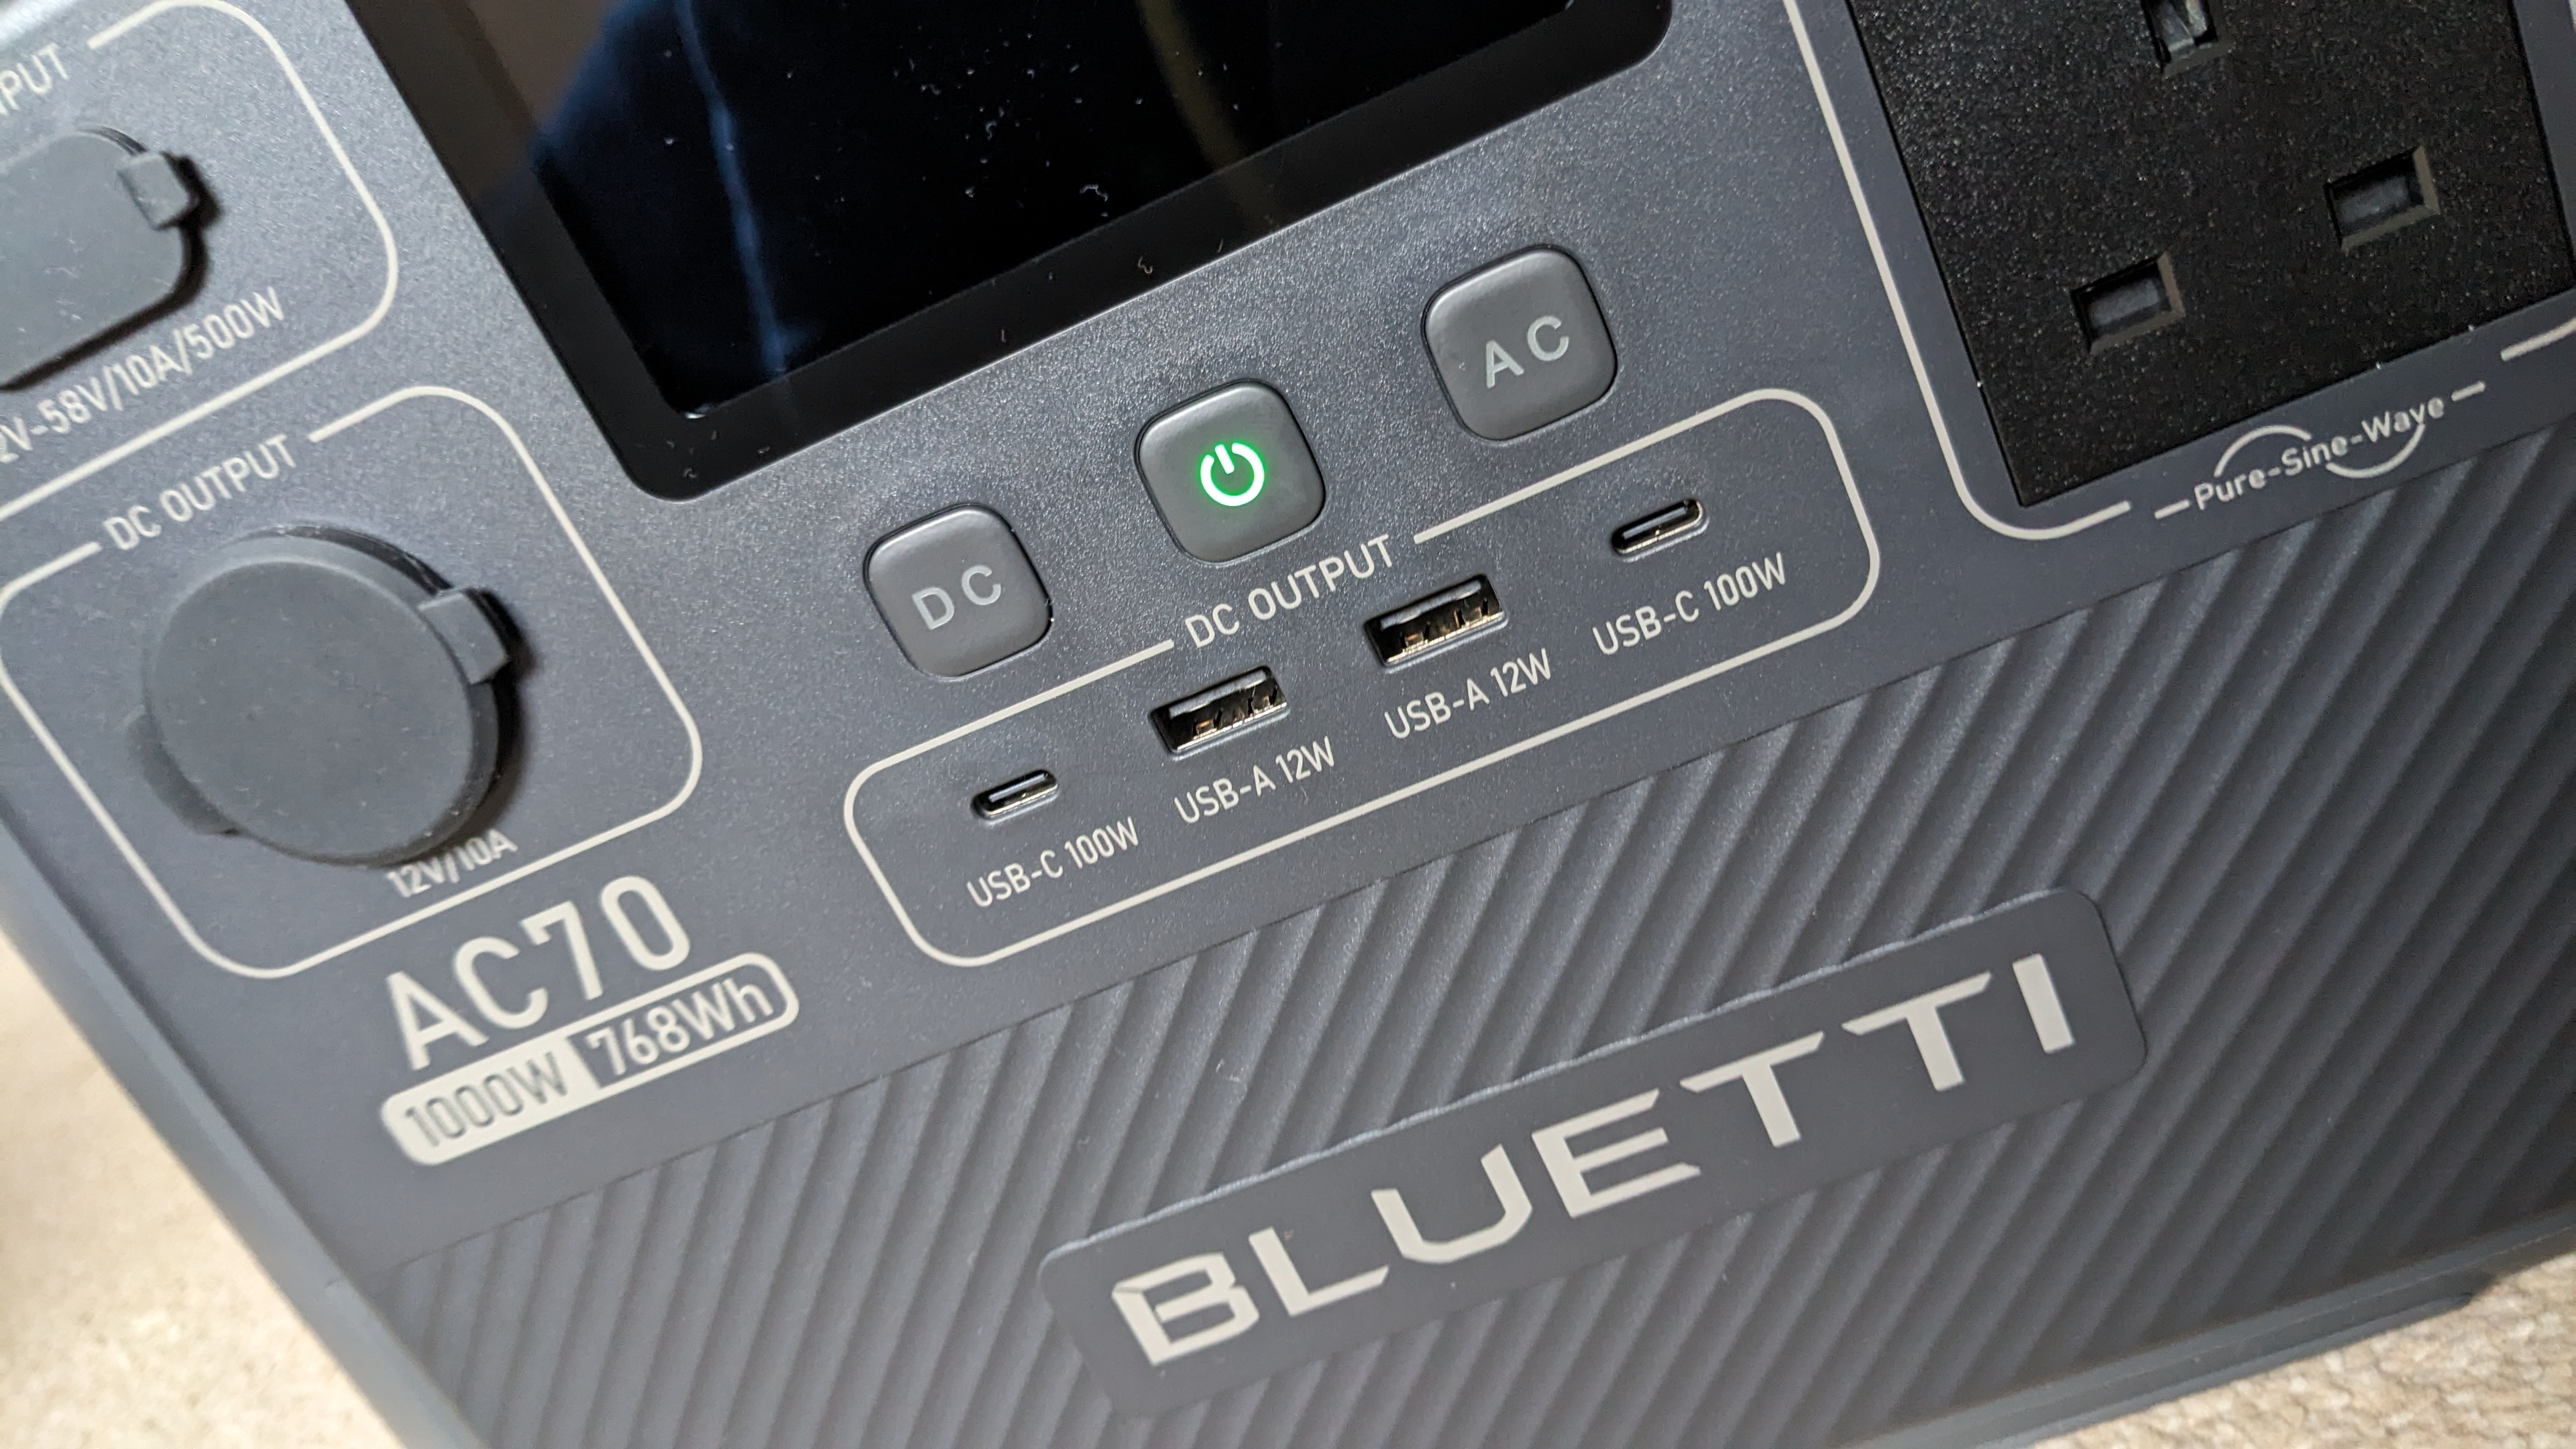 Bluetti AC70 during our test and review process